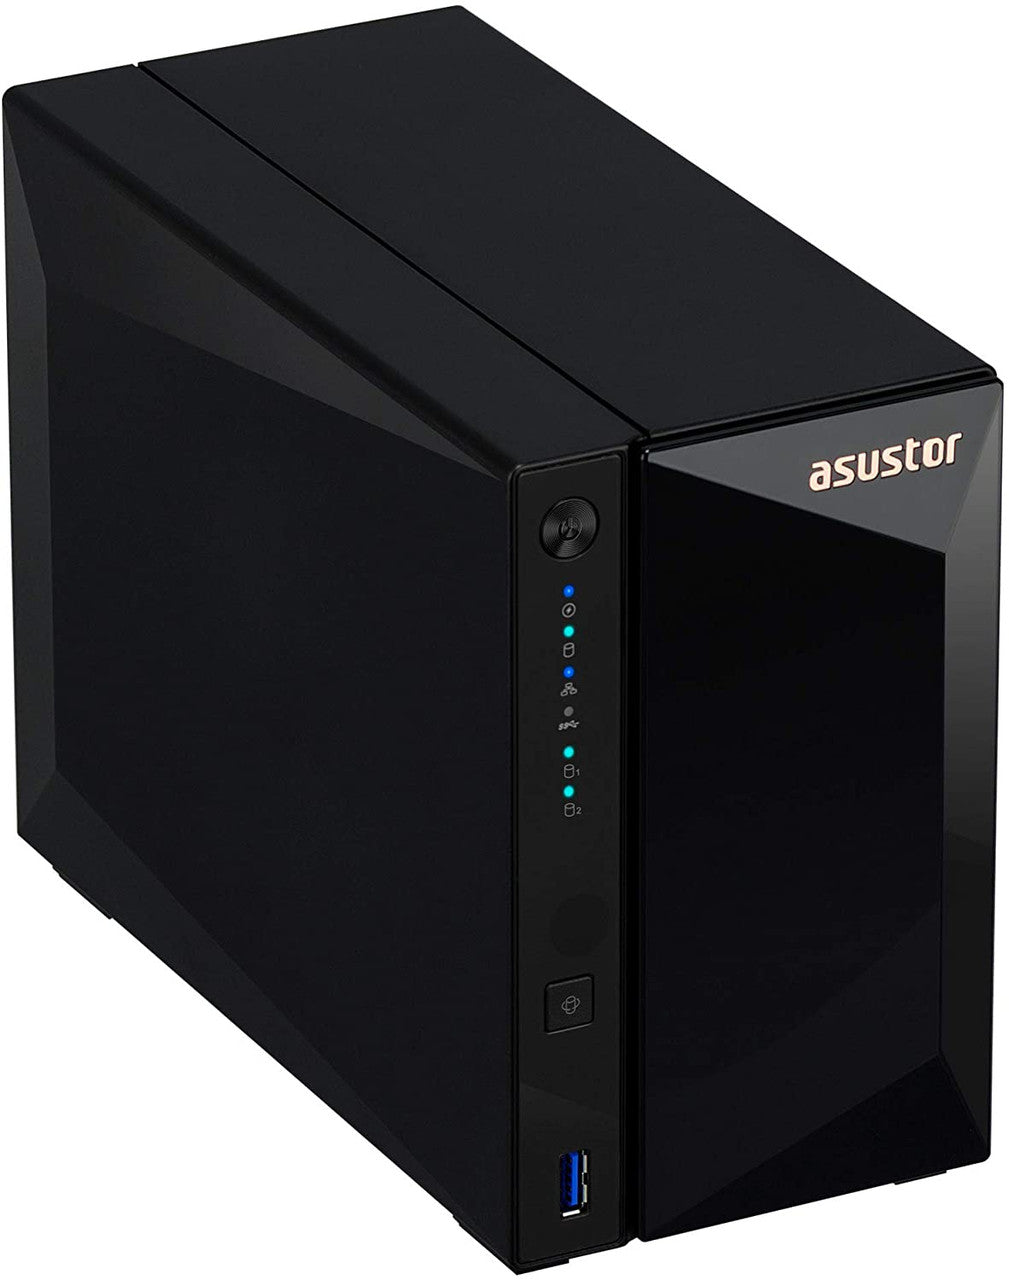 Asustor AS3302T 2-Bay Drivestor 2 PRO NAS with 2GB RAM and 28TB (2x14TB) Seagate Ironwolf PRO Drives Fully Assembled and Tested